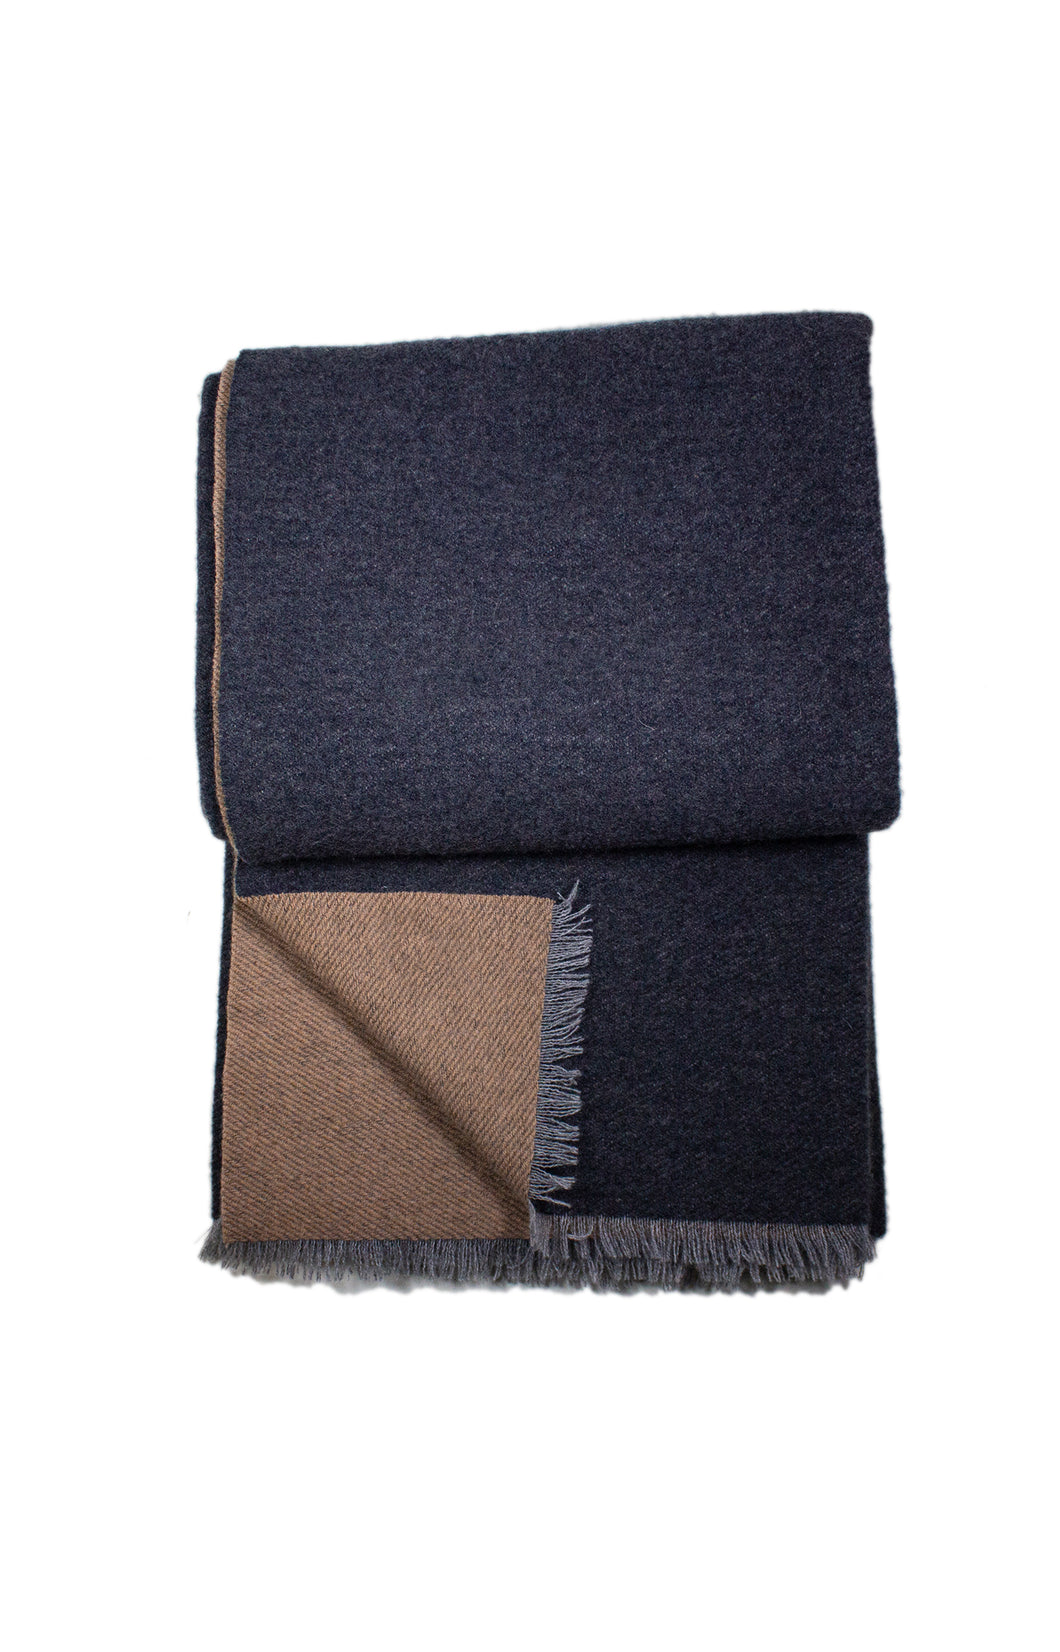 Charcoal & Camel Sutton Cashmere Throw